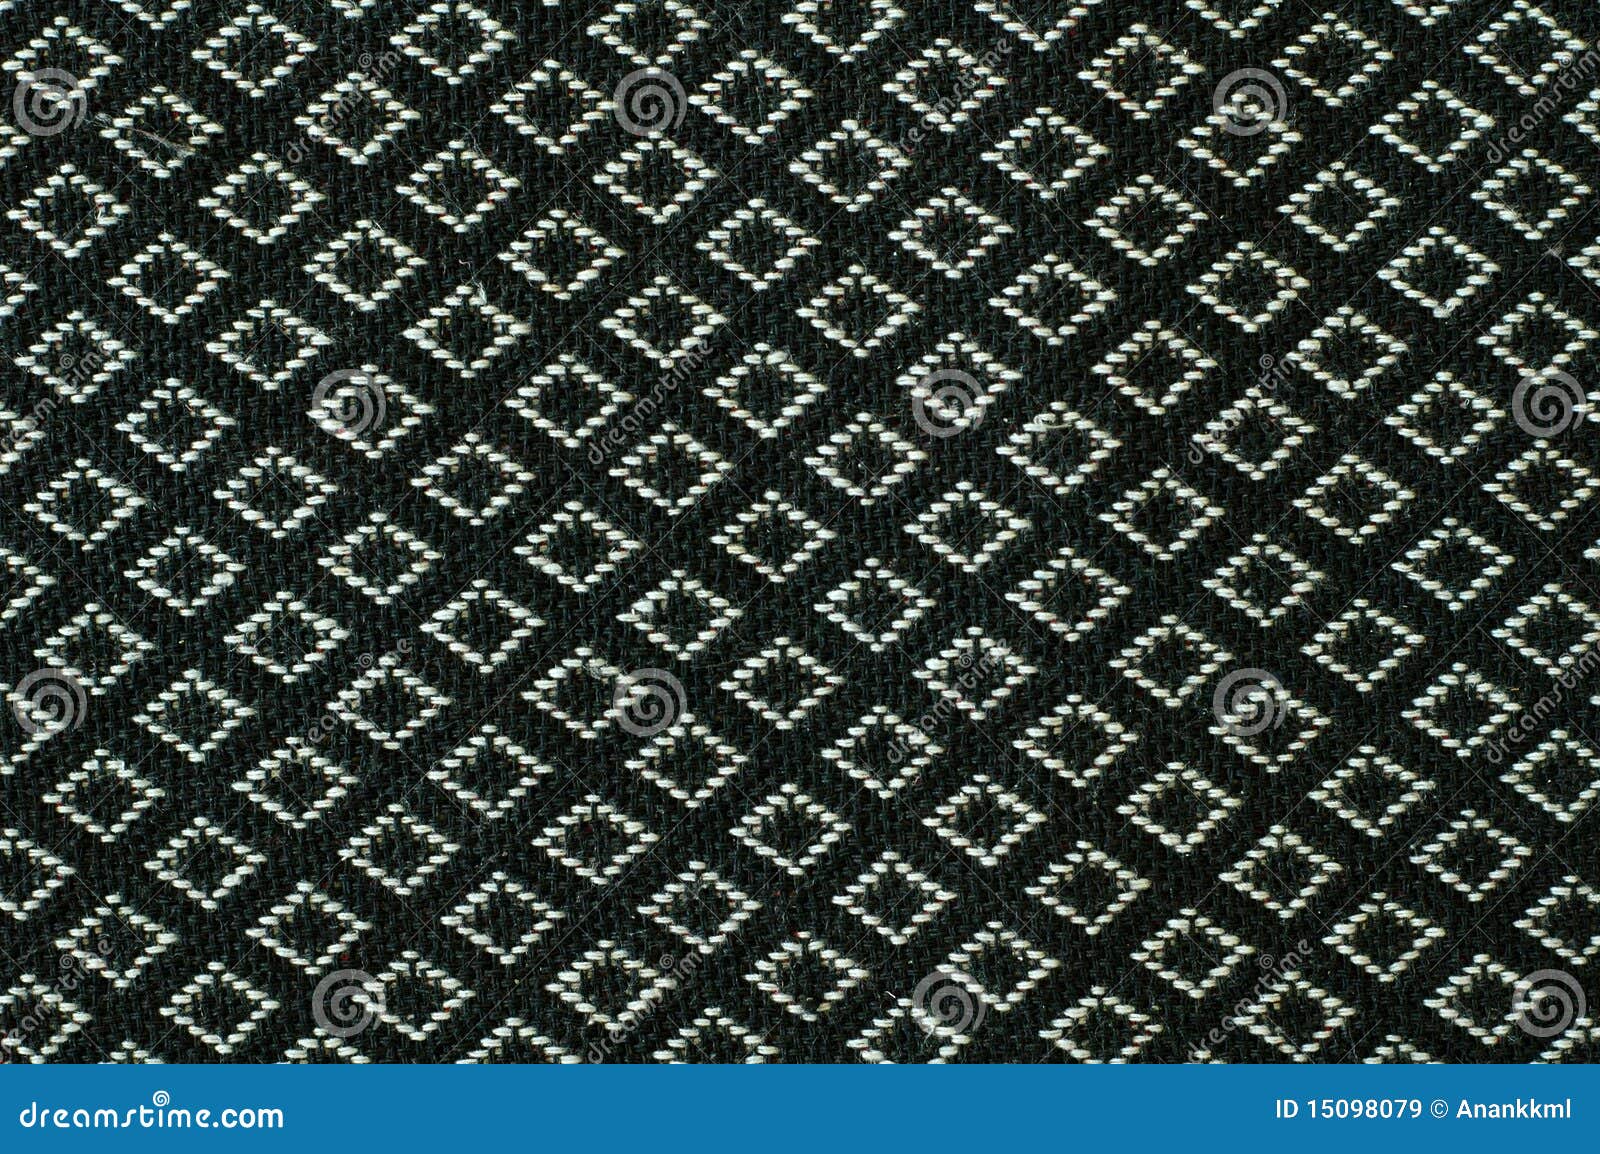 Texture Of Bed Cover Royalty Free Stock Images - Image: 15098079